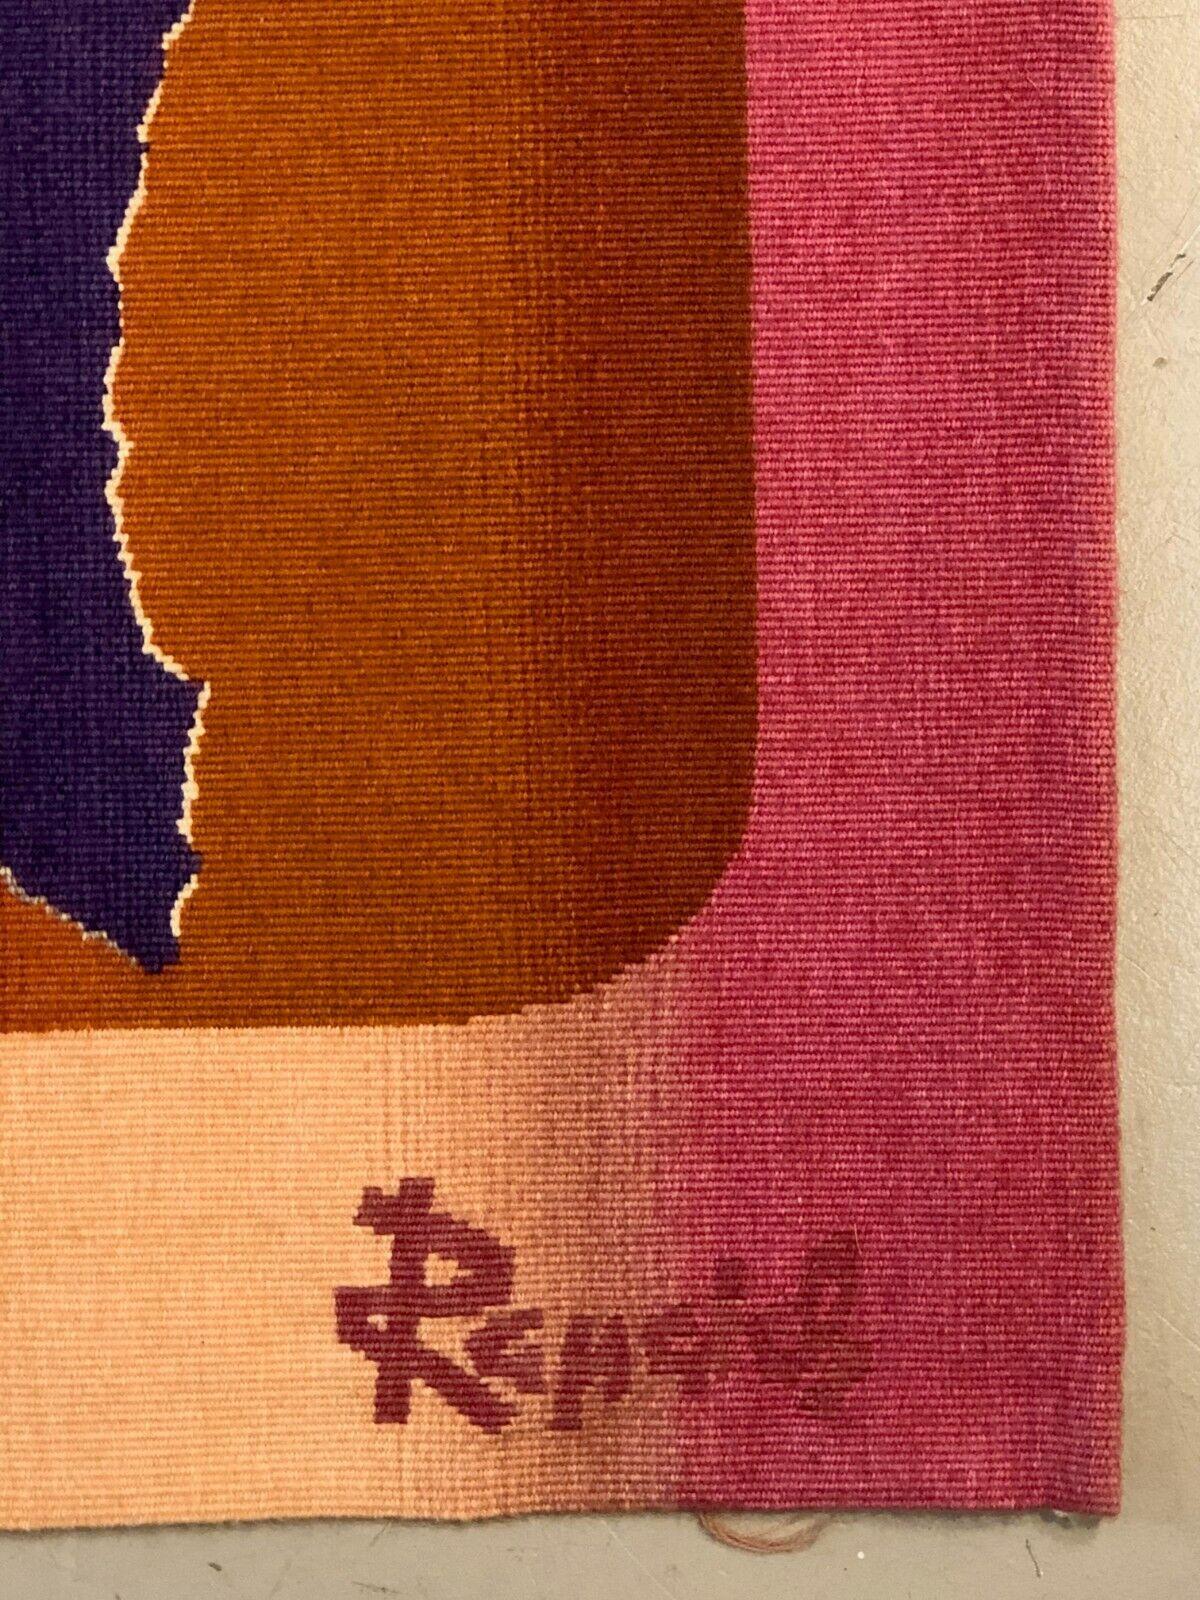 An exceptional Aubusson tapestry, Post-Modern, Forme-Libre, Lyrical Abstraction, hand-woven in wool, signed at the front with the monogram MH and signature Rapaich; a card on the back details the title of the piece 